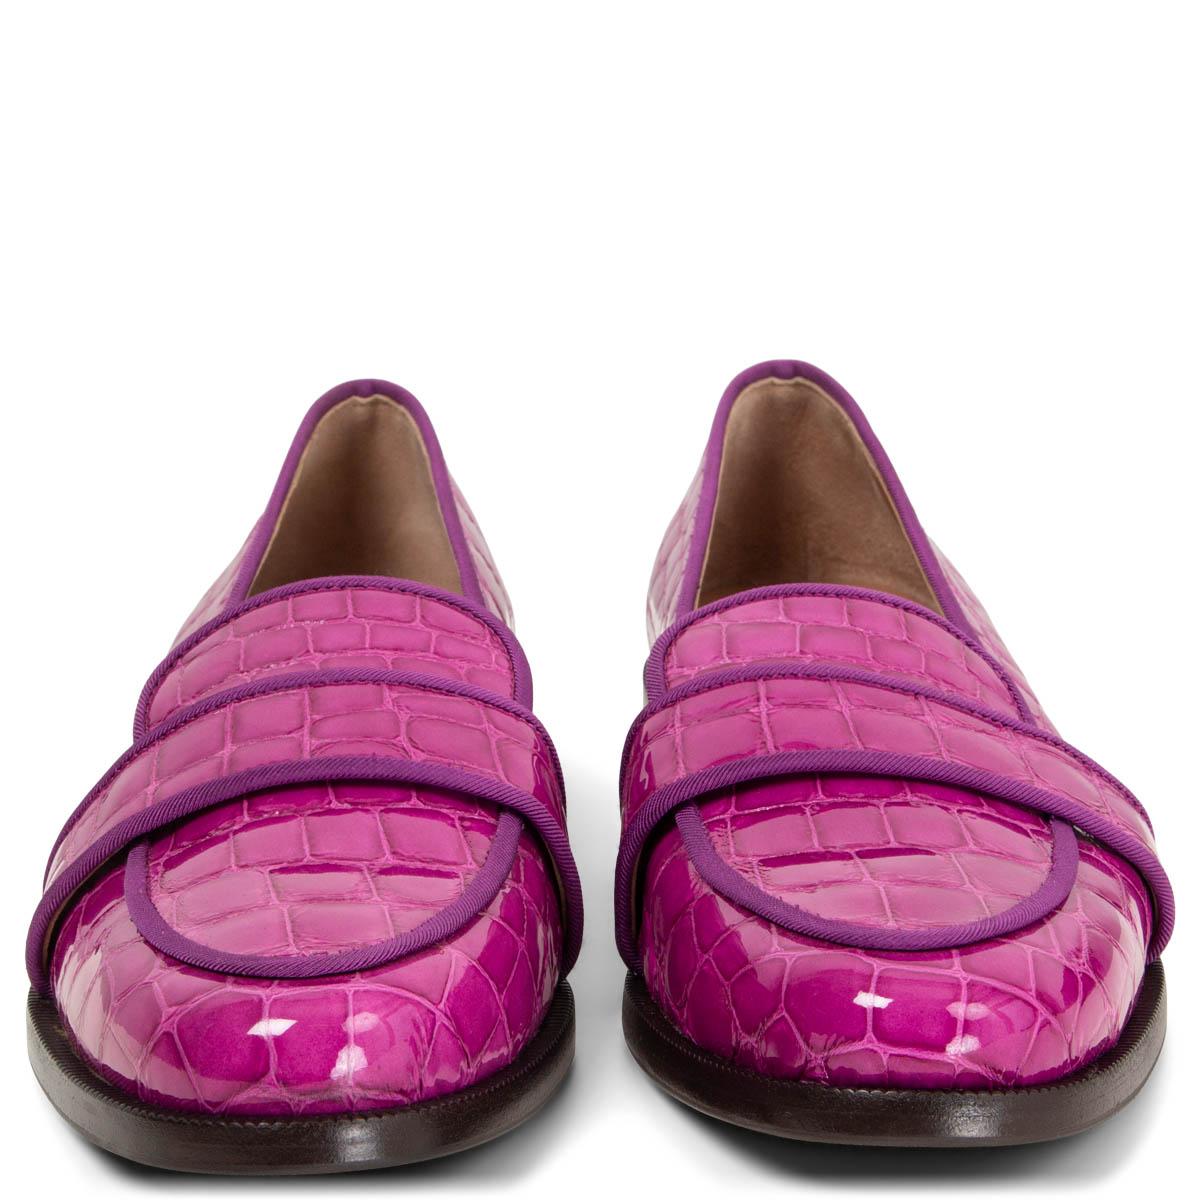 100% authentic Aquazzura Martin loafers in pink made from sleek coco lux and grosgrain pipping. The easy to wear style has a notched vamp, rounded toe and is finished on a comfortable. Rubber sole has been added. Brand new. 

Measurements
Imprinted